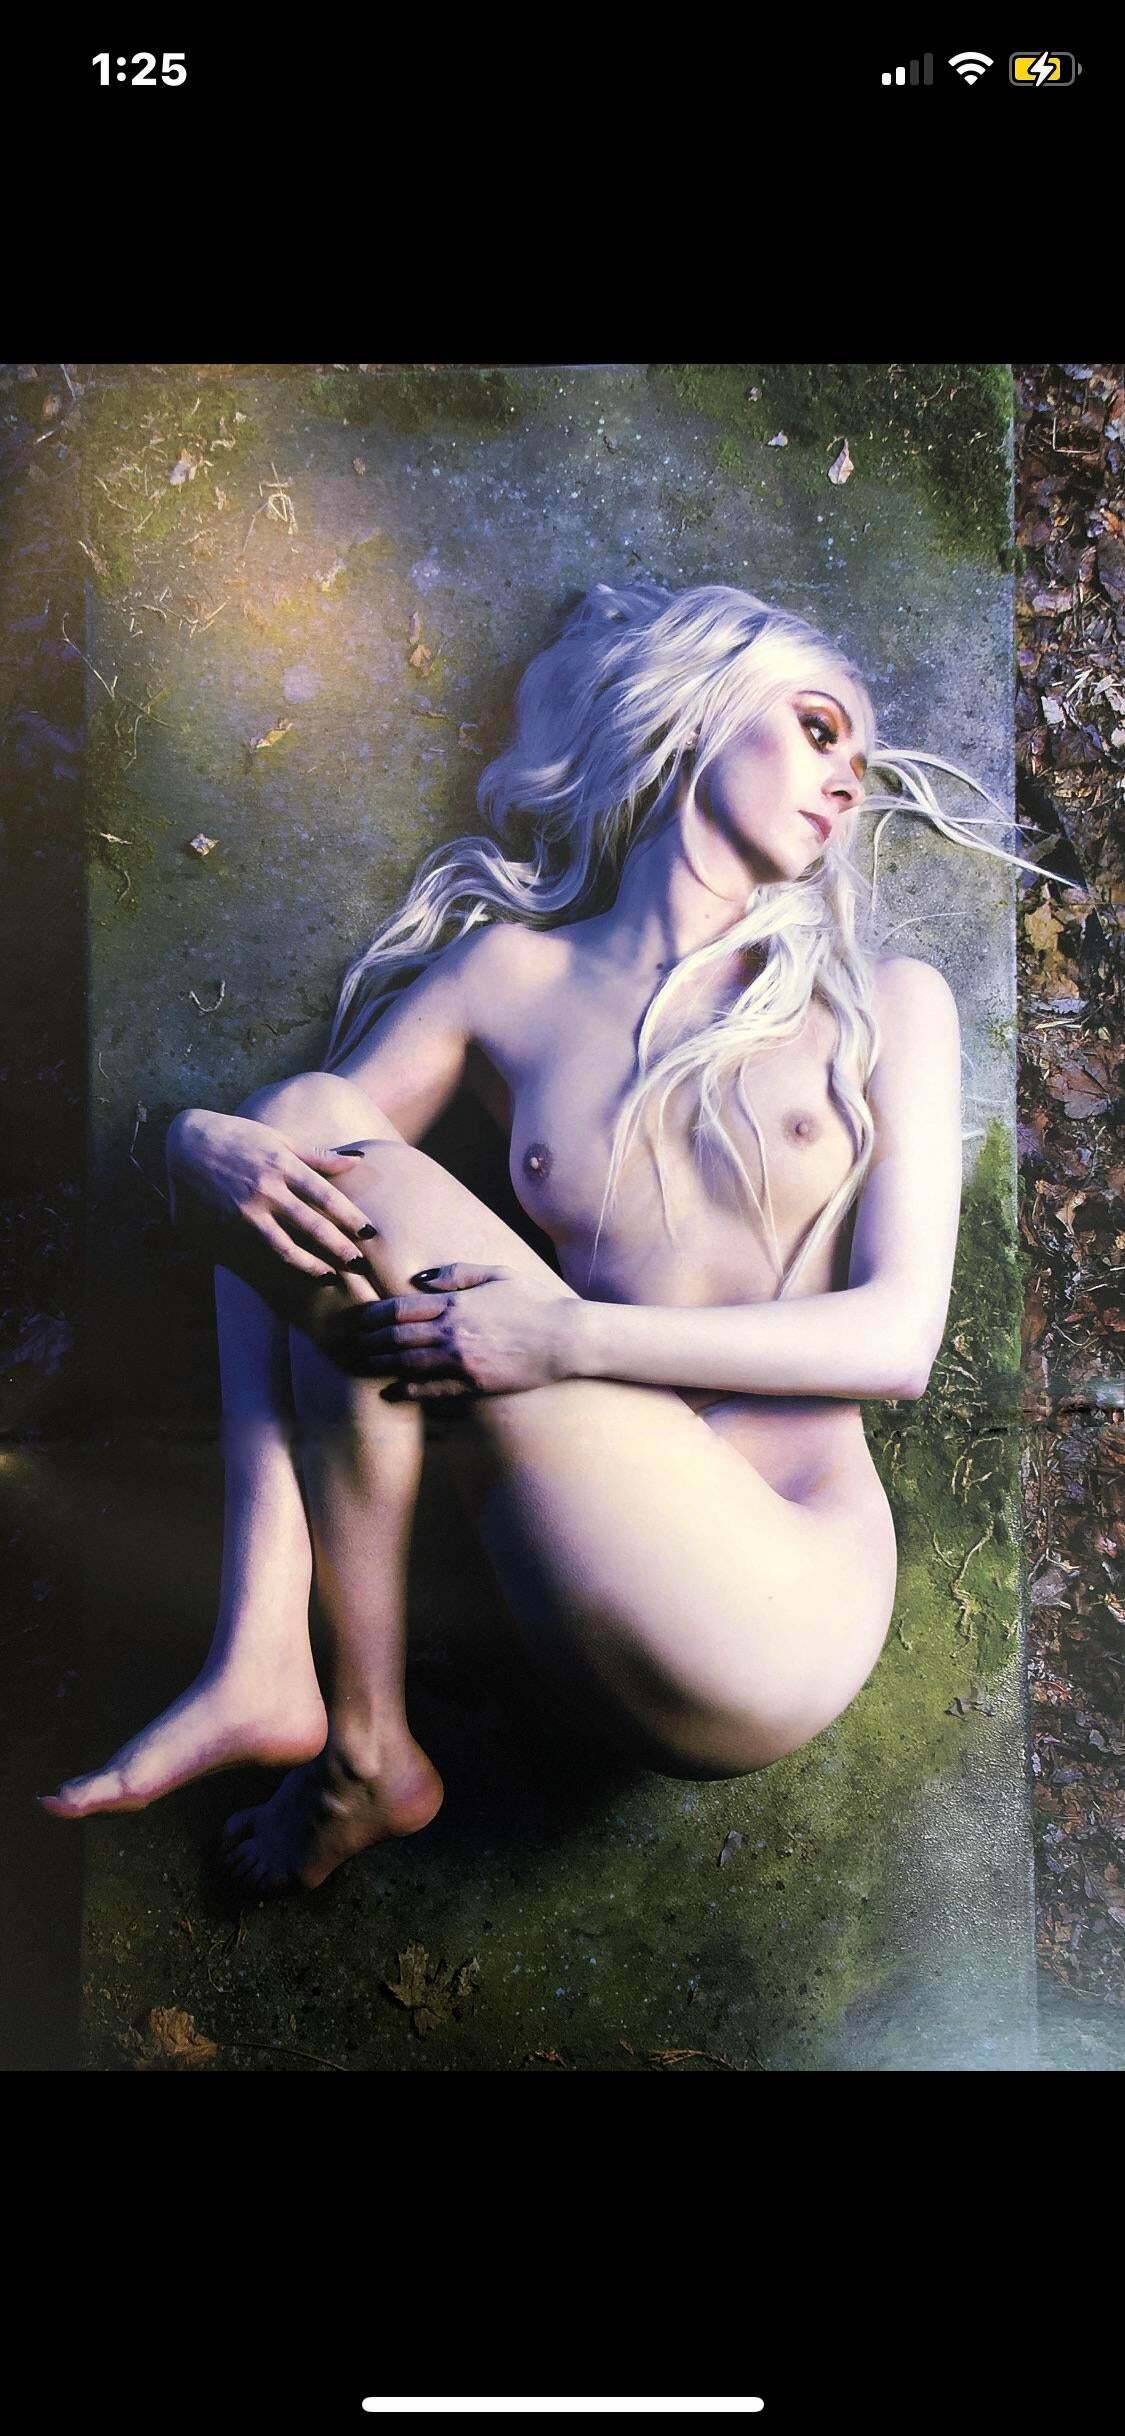 Just started craving Taylor Momsen’s tight pussy all of a sudden….🥵🍆🍑💦